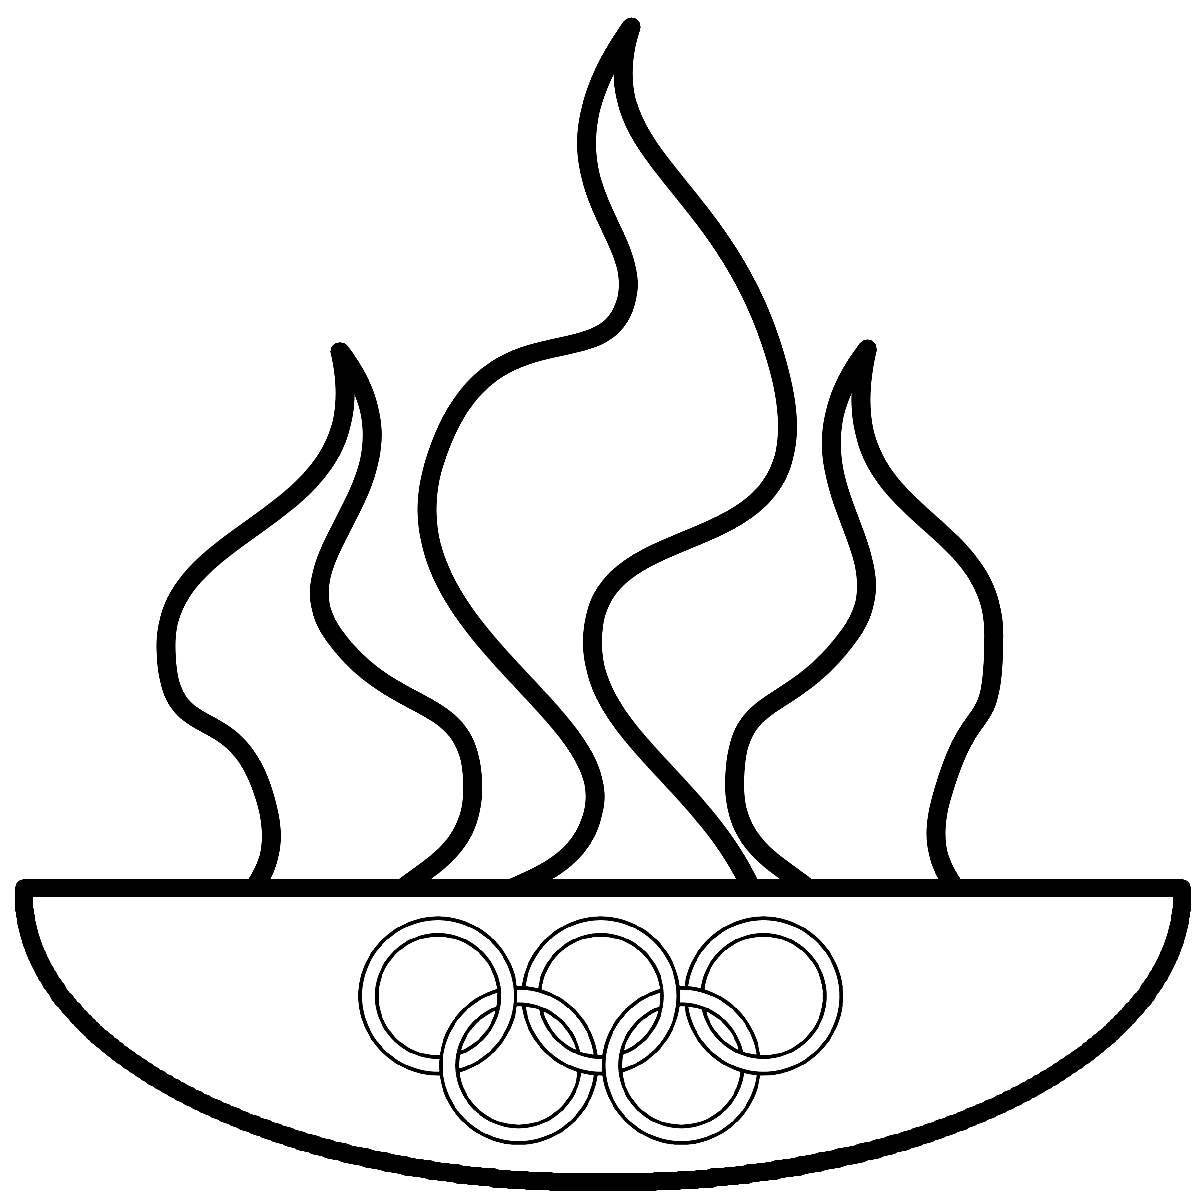 Coloring book shining olympic torch